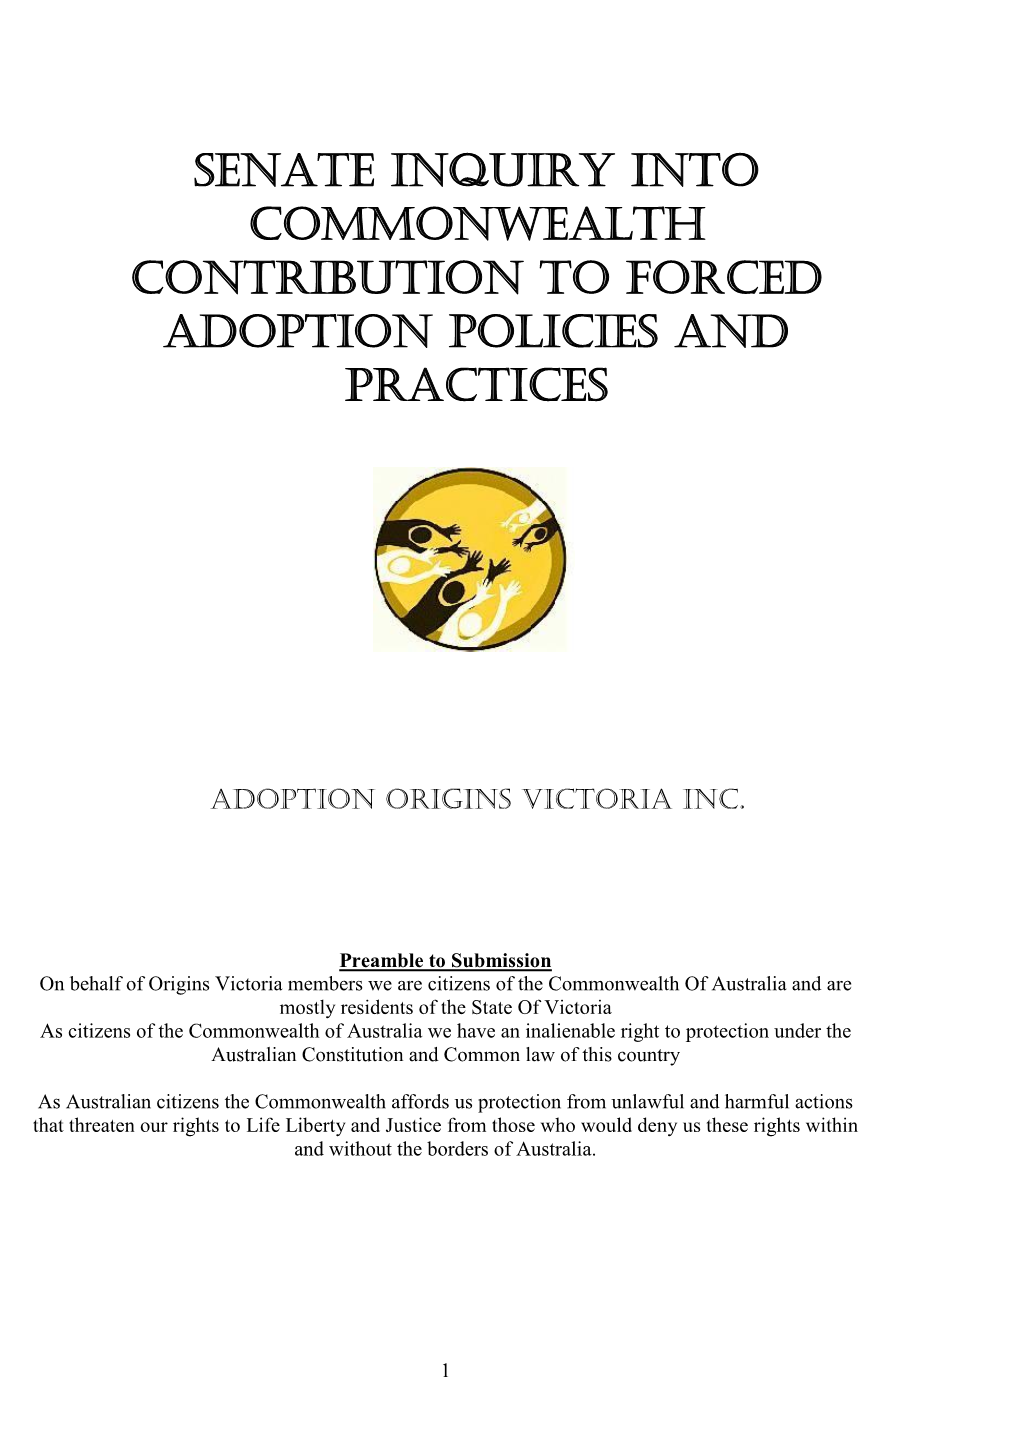 Senate Inquiry Into Commonwealth Contribution to Forced Adoption Policies and Practices